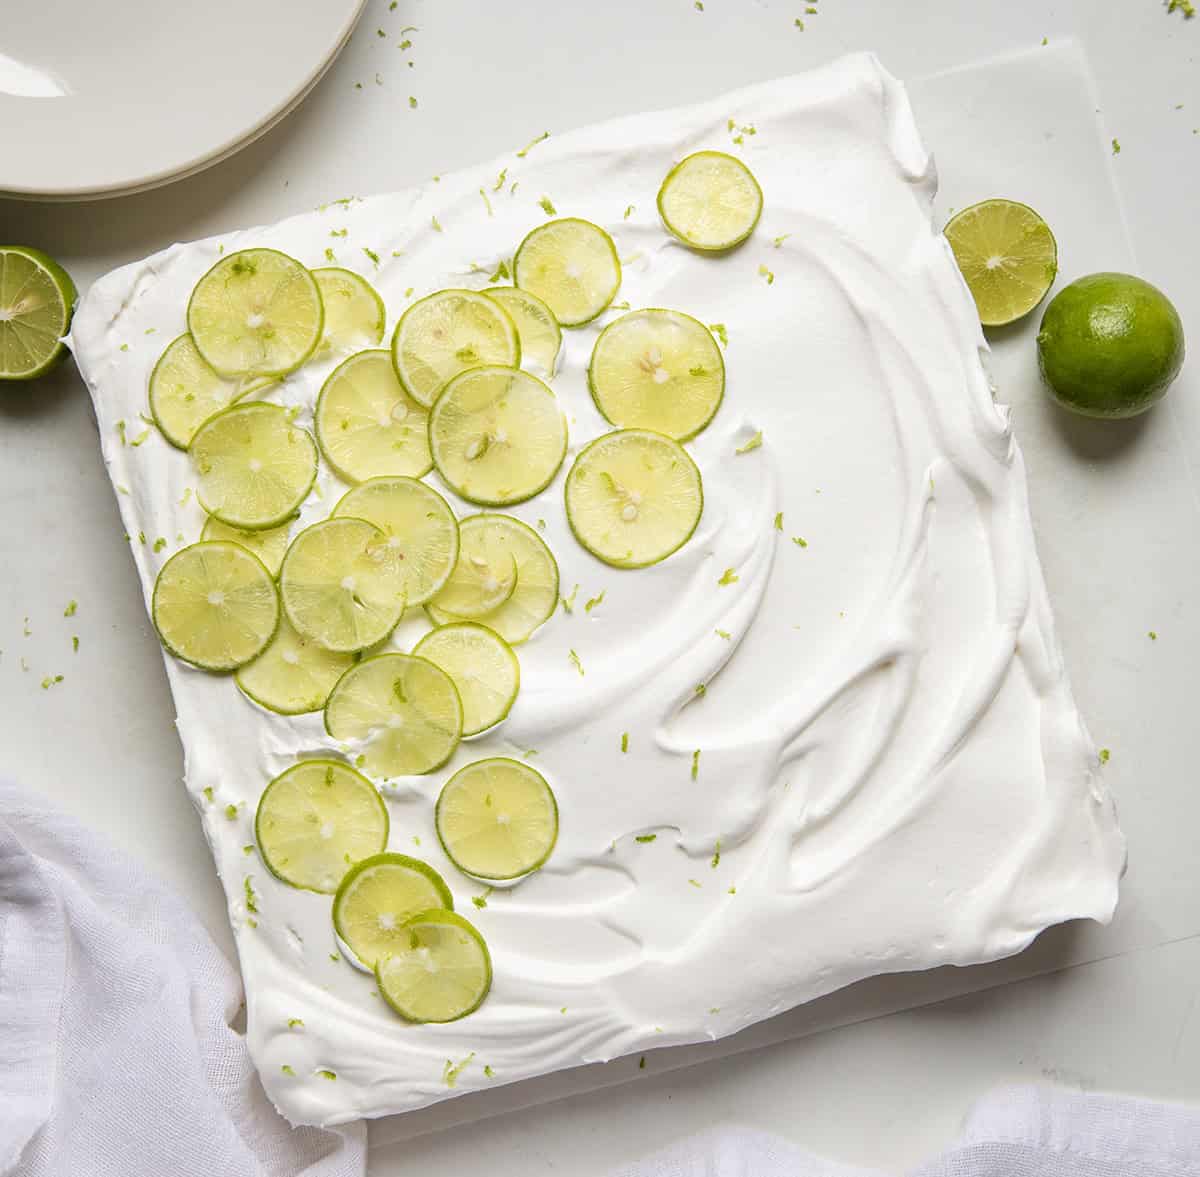 Key Lime Pie Bars on a white table from overhead.